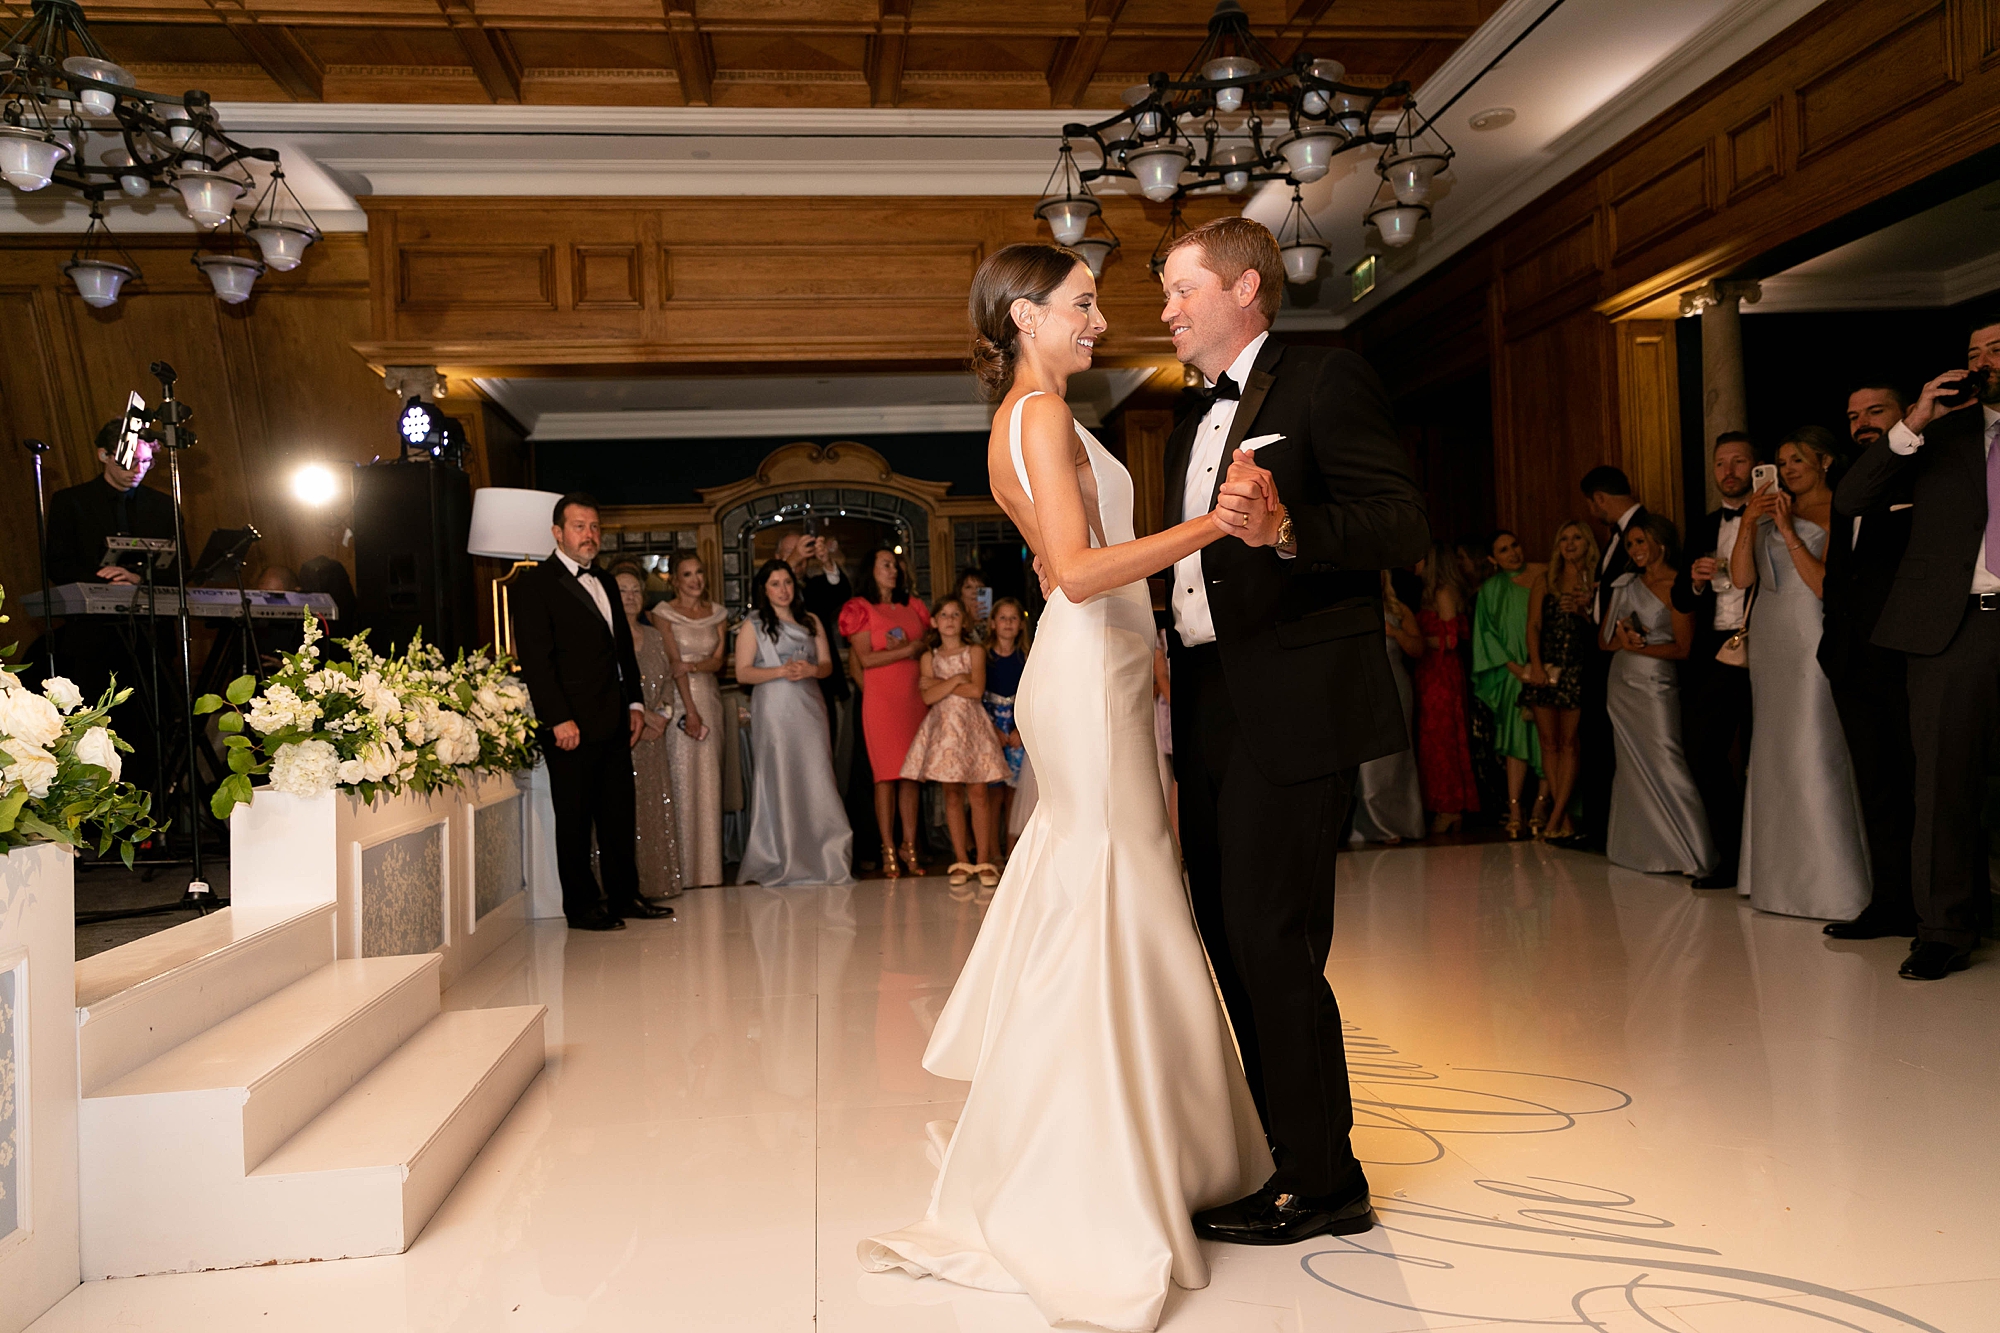 newlyweds dance during wedding reception at the Crescent Club